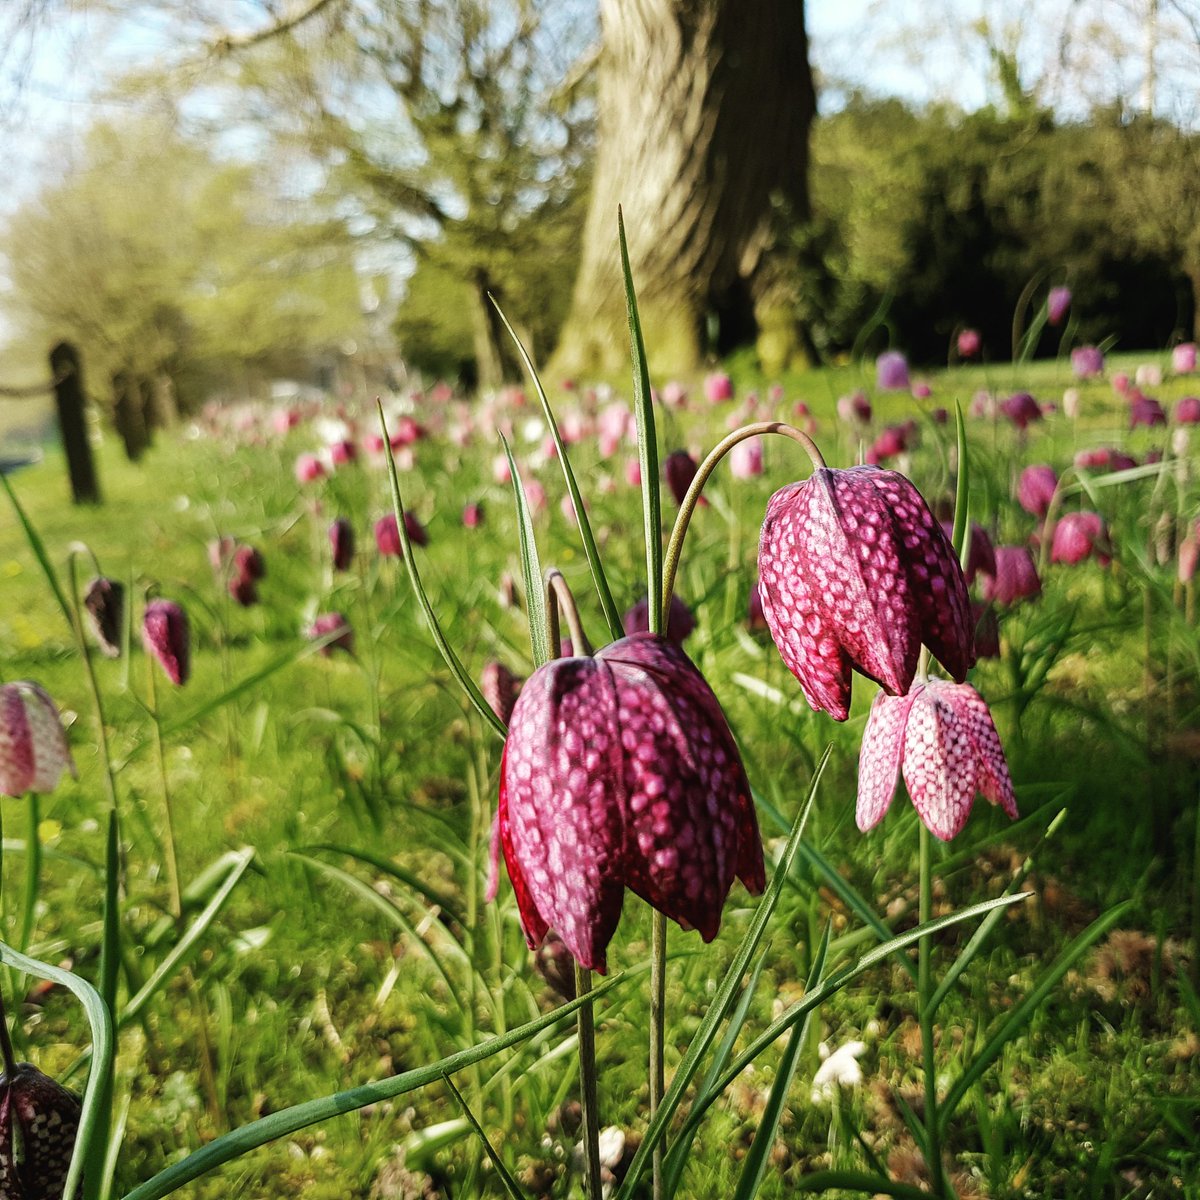 Those pesky rabbits have allowed the @PolesdenLaceyNT Snakeshead Fritillaries to flower this year! There are carpets of them right now on the Walnut Lawn. #floralfusion